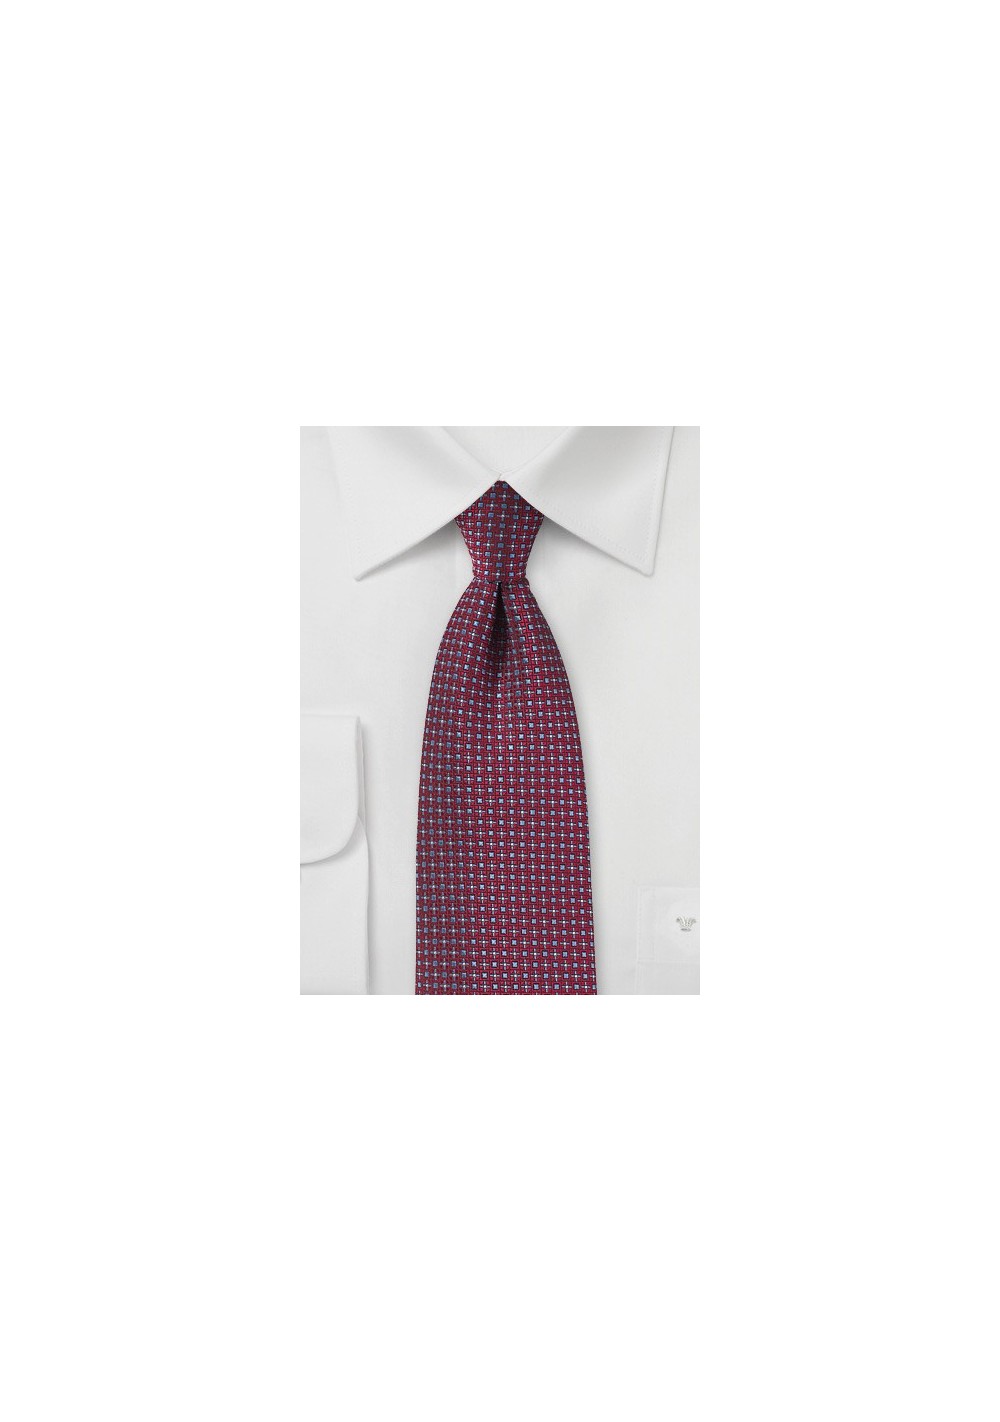 Red and Light Blue Woven Necktie